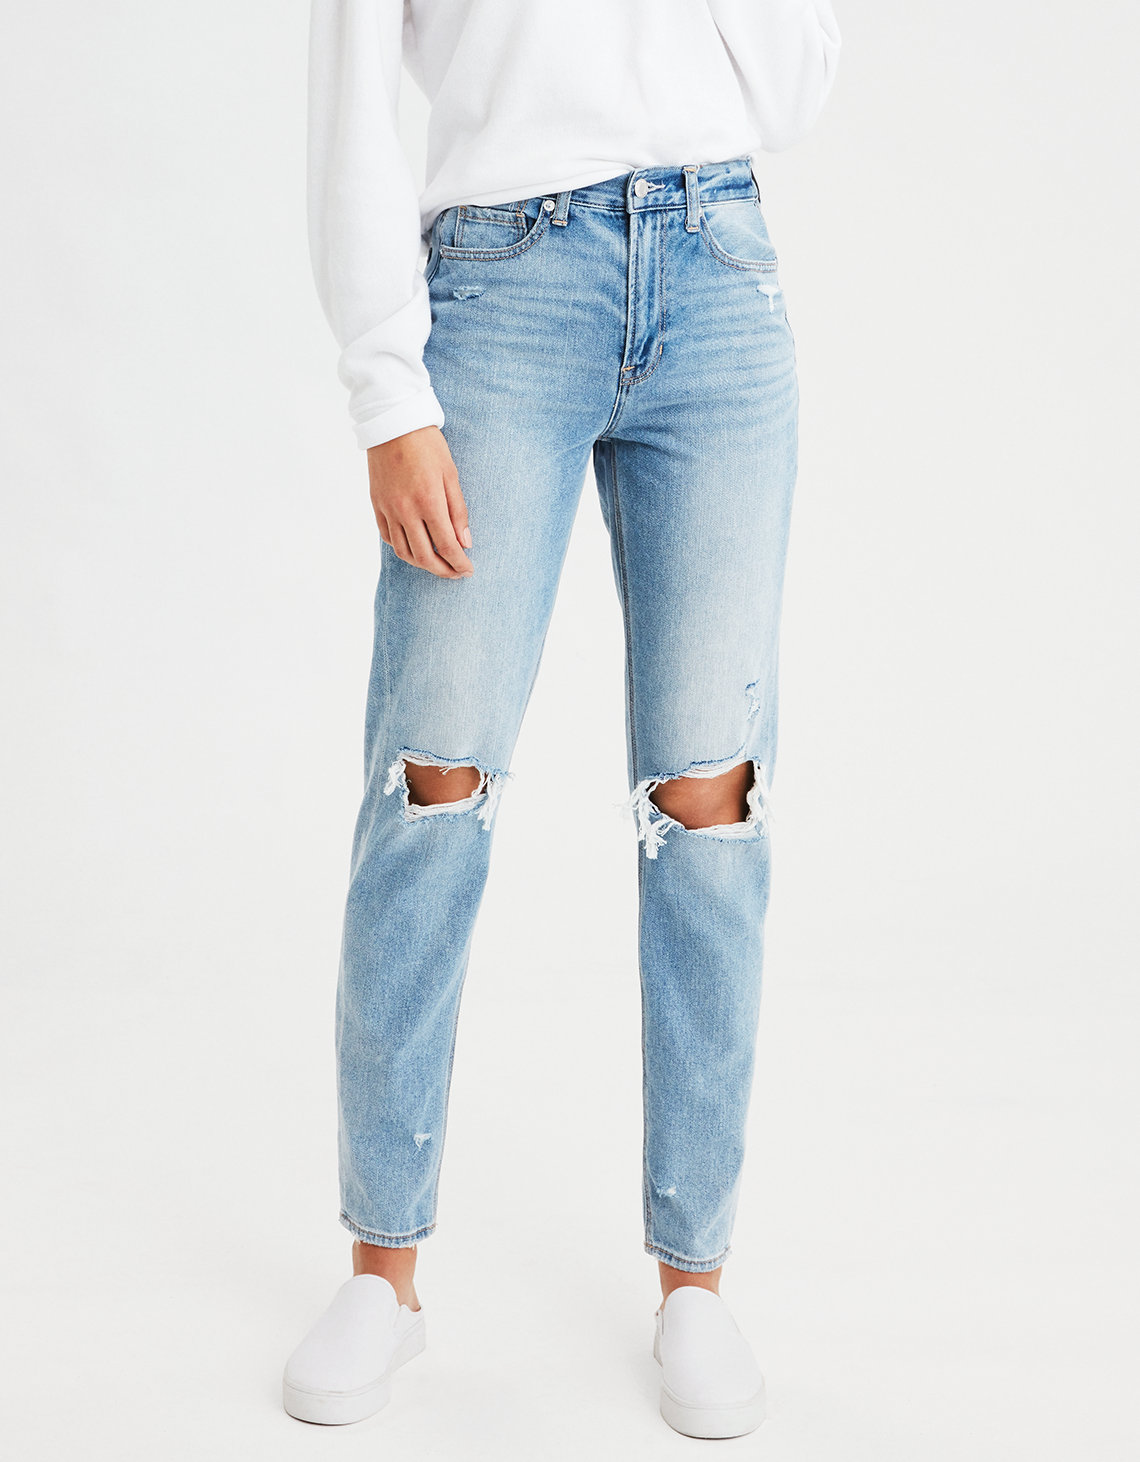 Mom Jean, Cool Classic | American Eagle Outfitters1140 x 1462